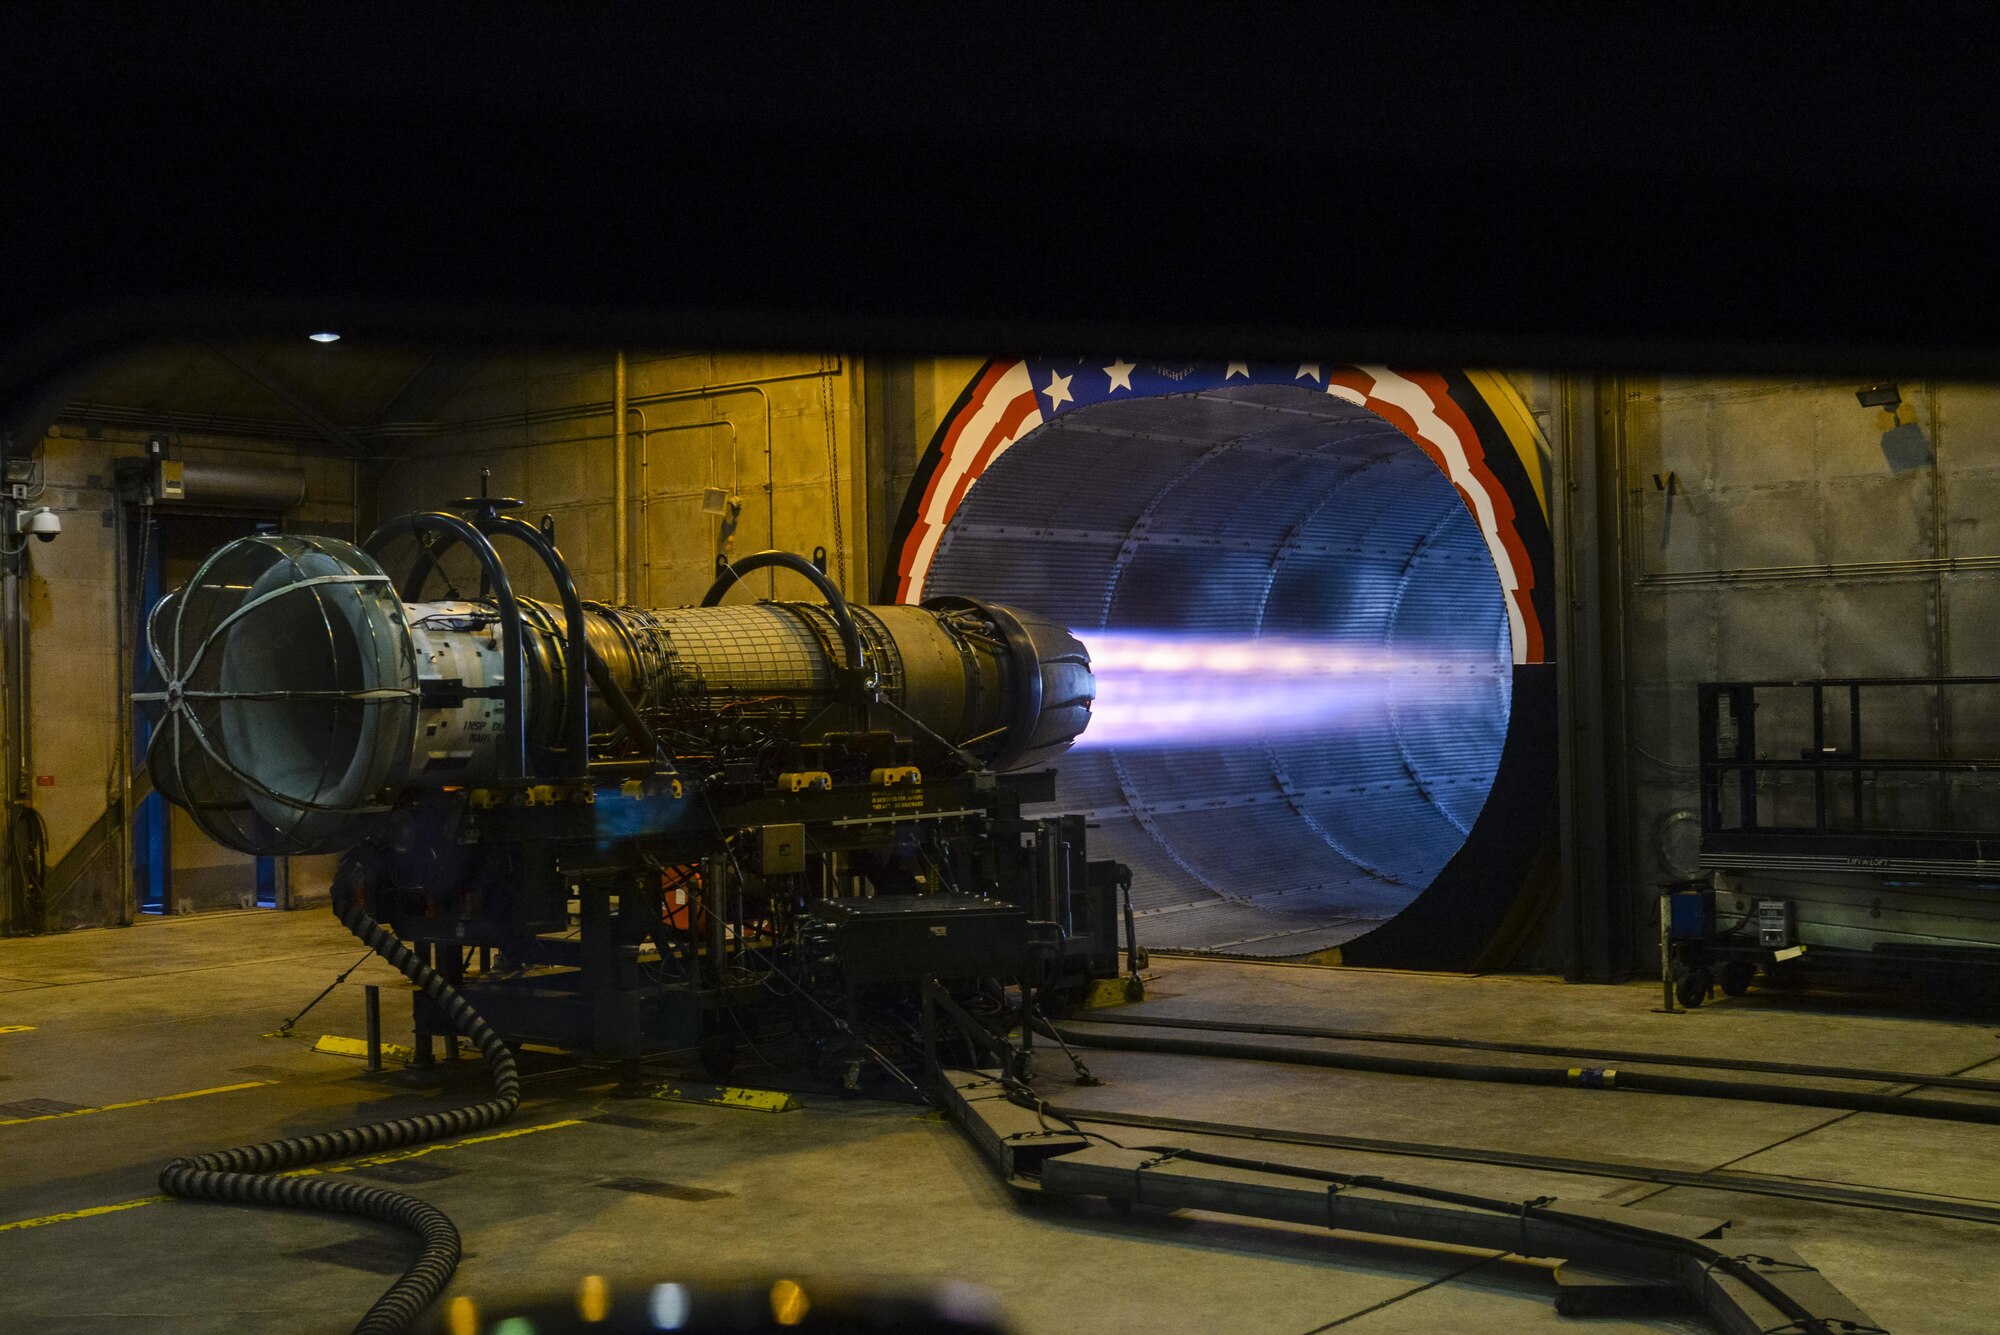 A picture of a gas turbine engine from a U.S. Air Force F-16C Fighting Falcon tested at full afterburner.